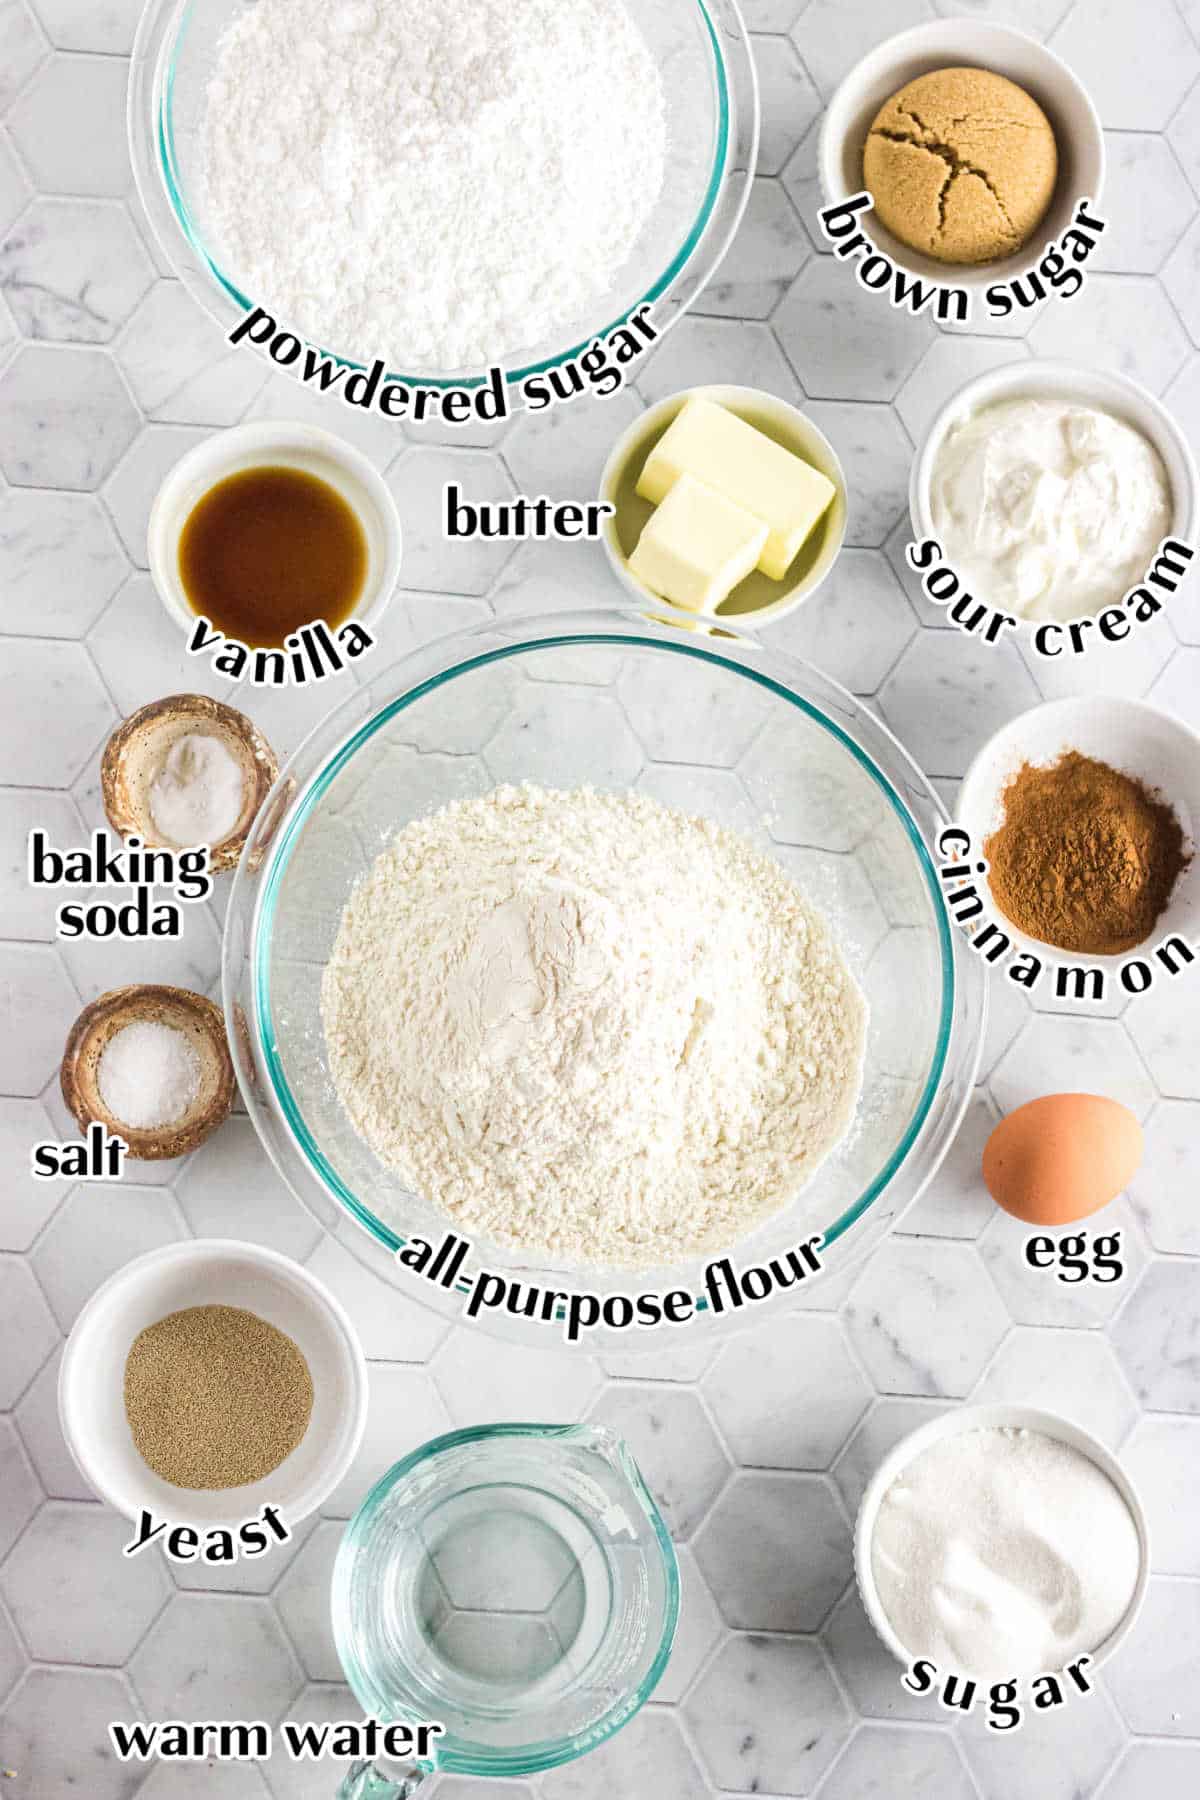 Labeled ingredients for the sour cream cinnamon rolls recipe.